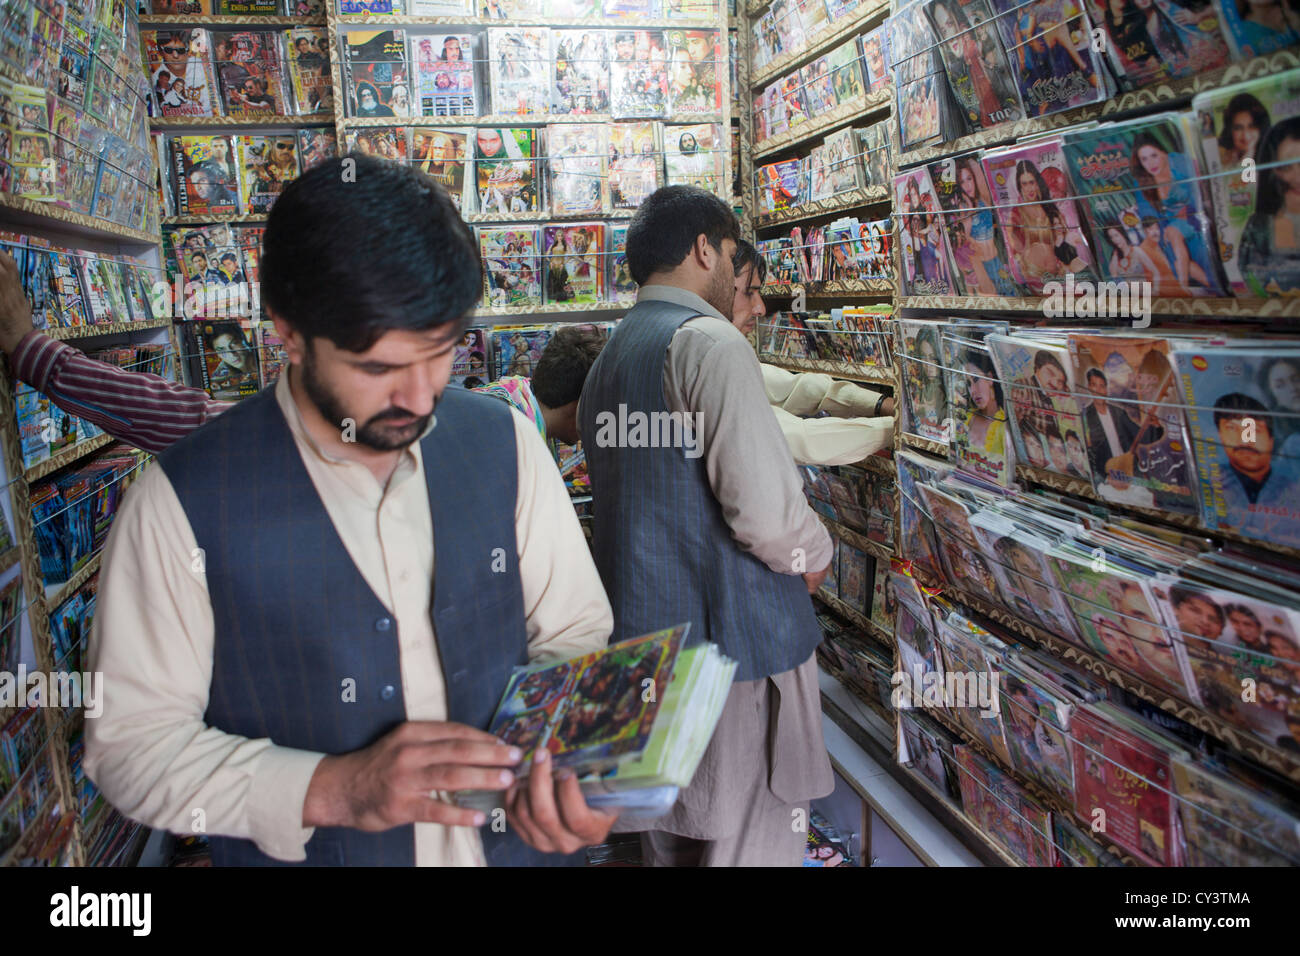 Indian movies shop in kabul Stock Photo